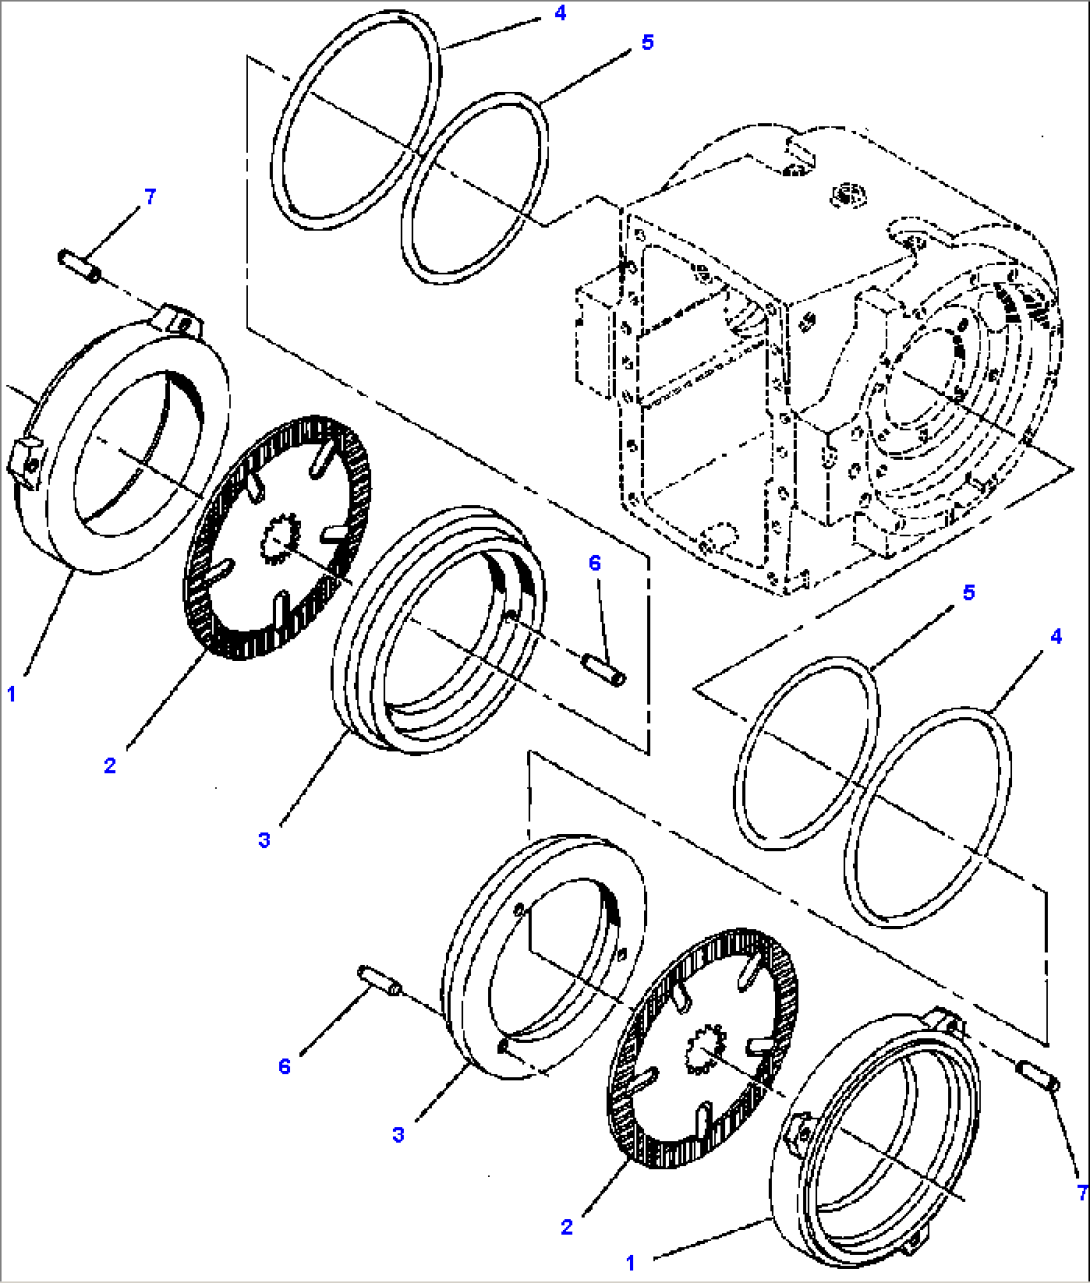 BRAKES WITH PLANETARY FINAL DRIVE